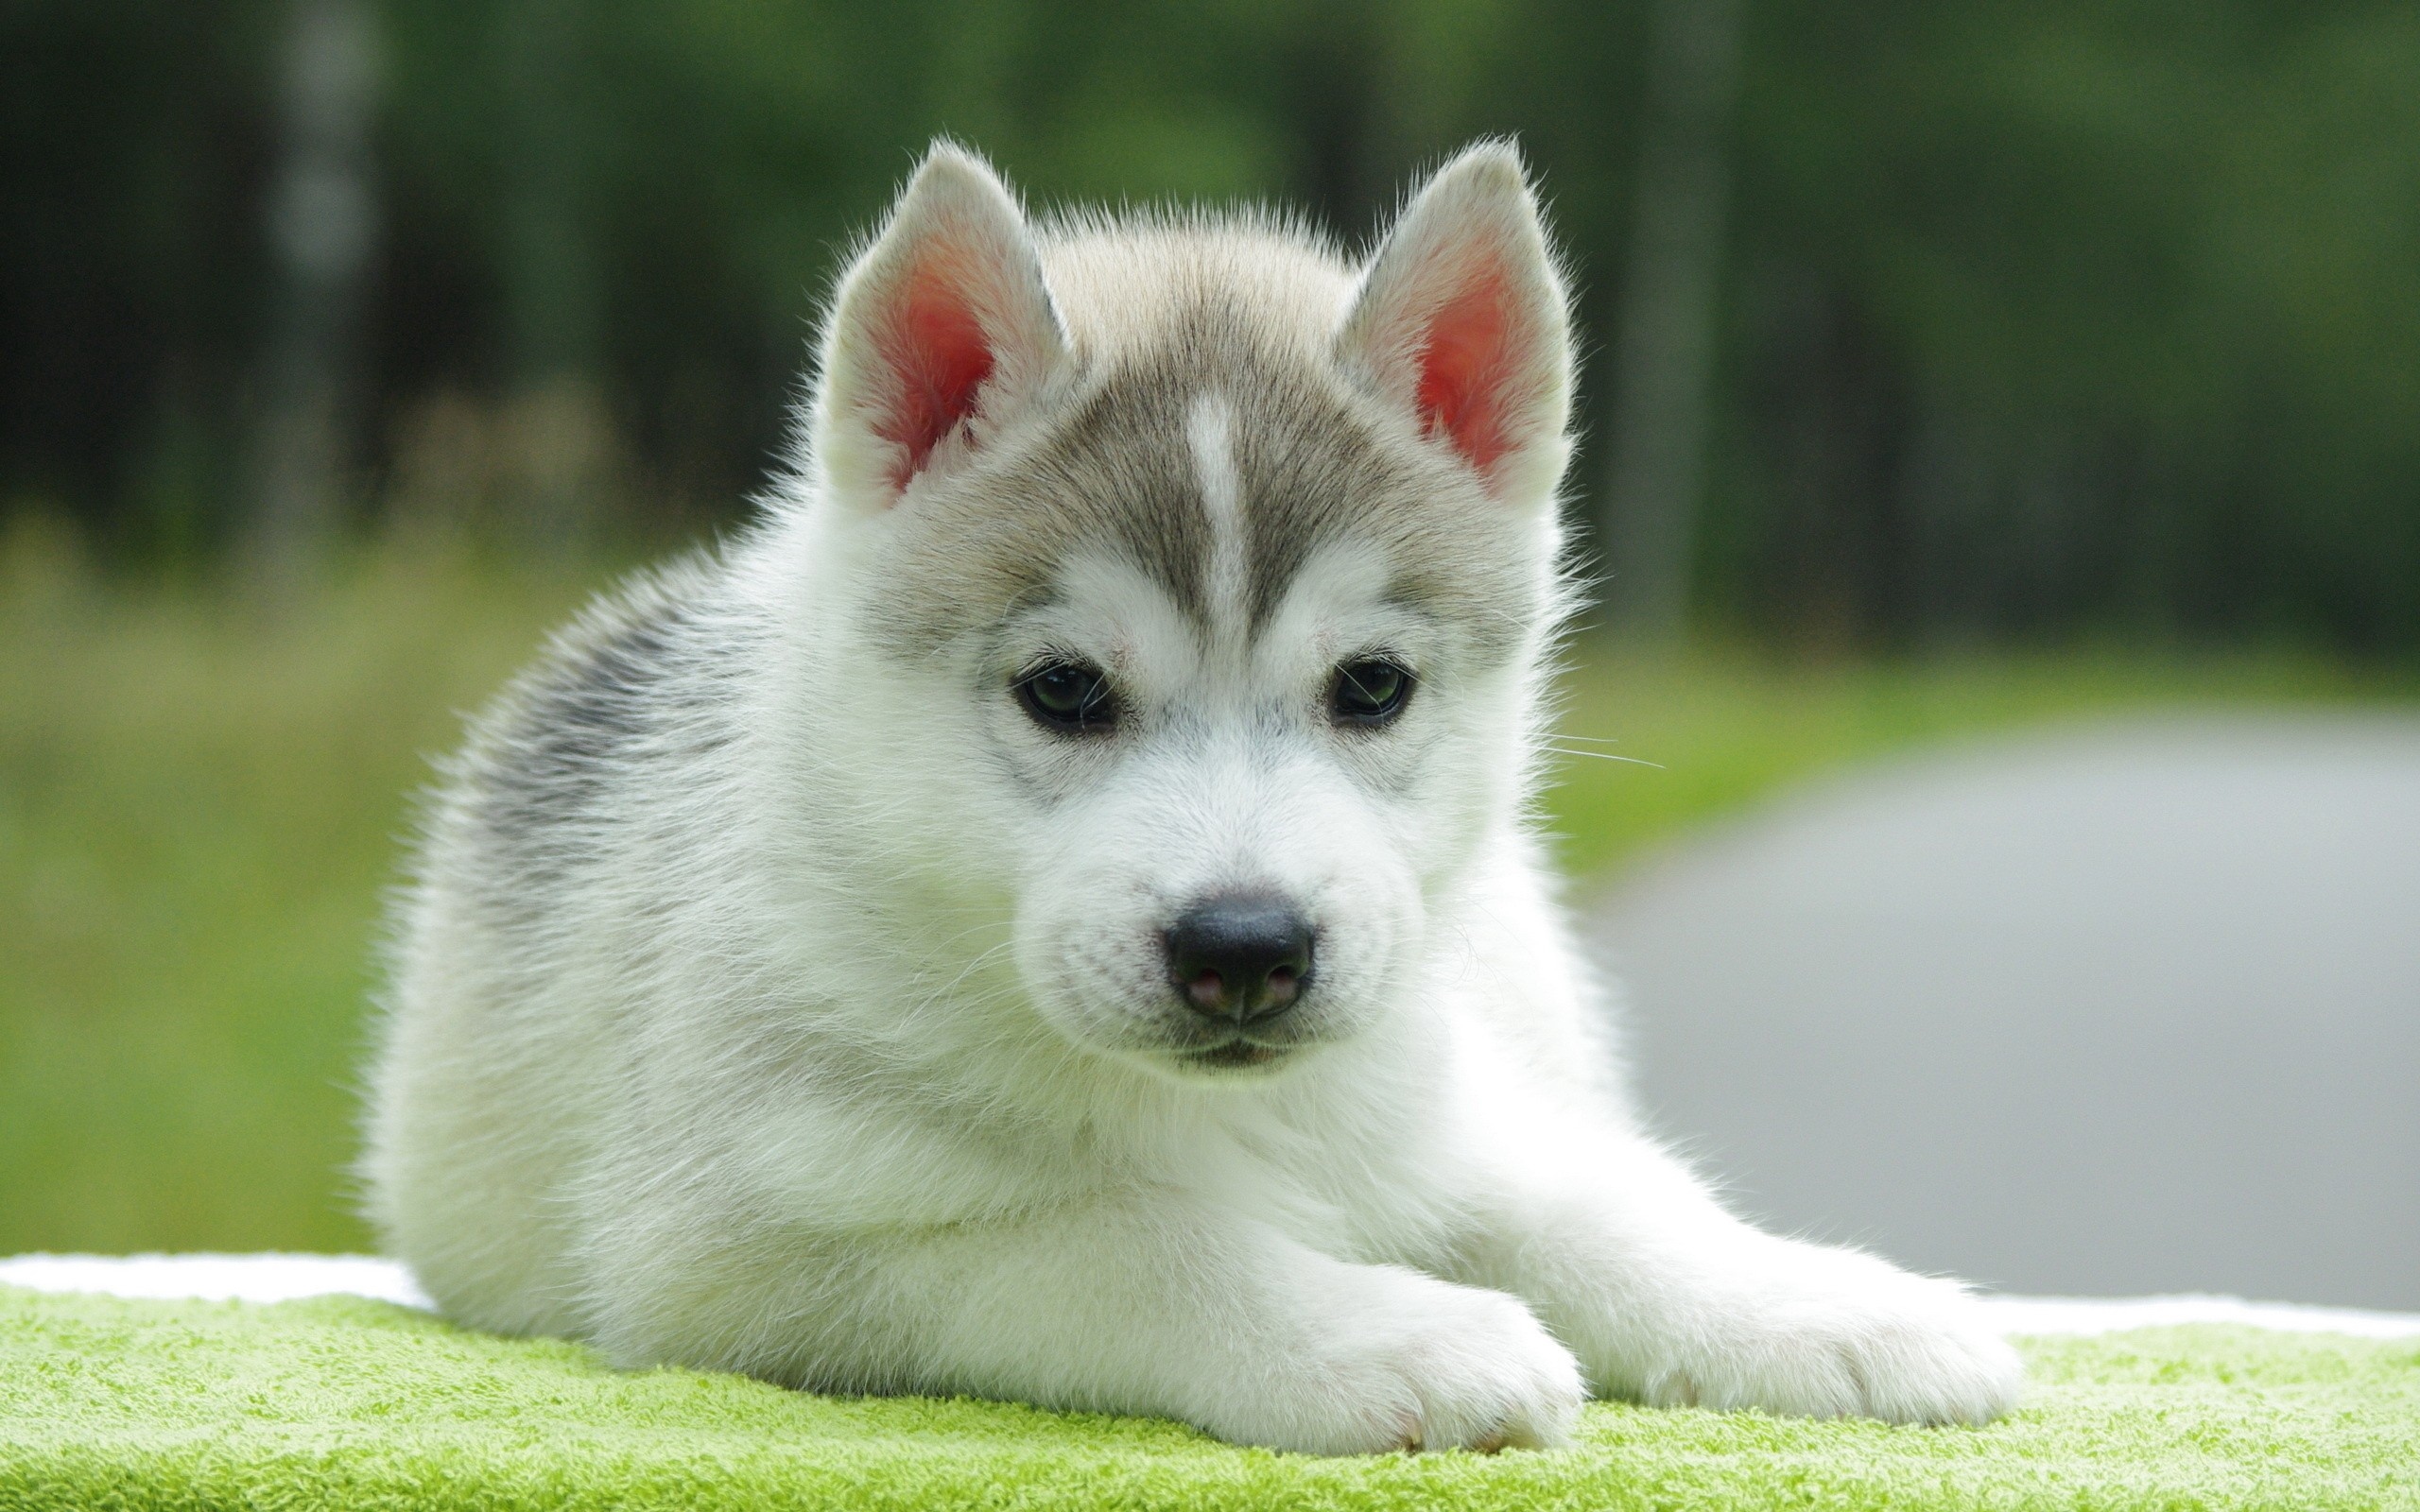 Popular Puppy images for mobile phone